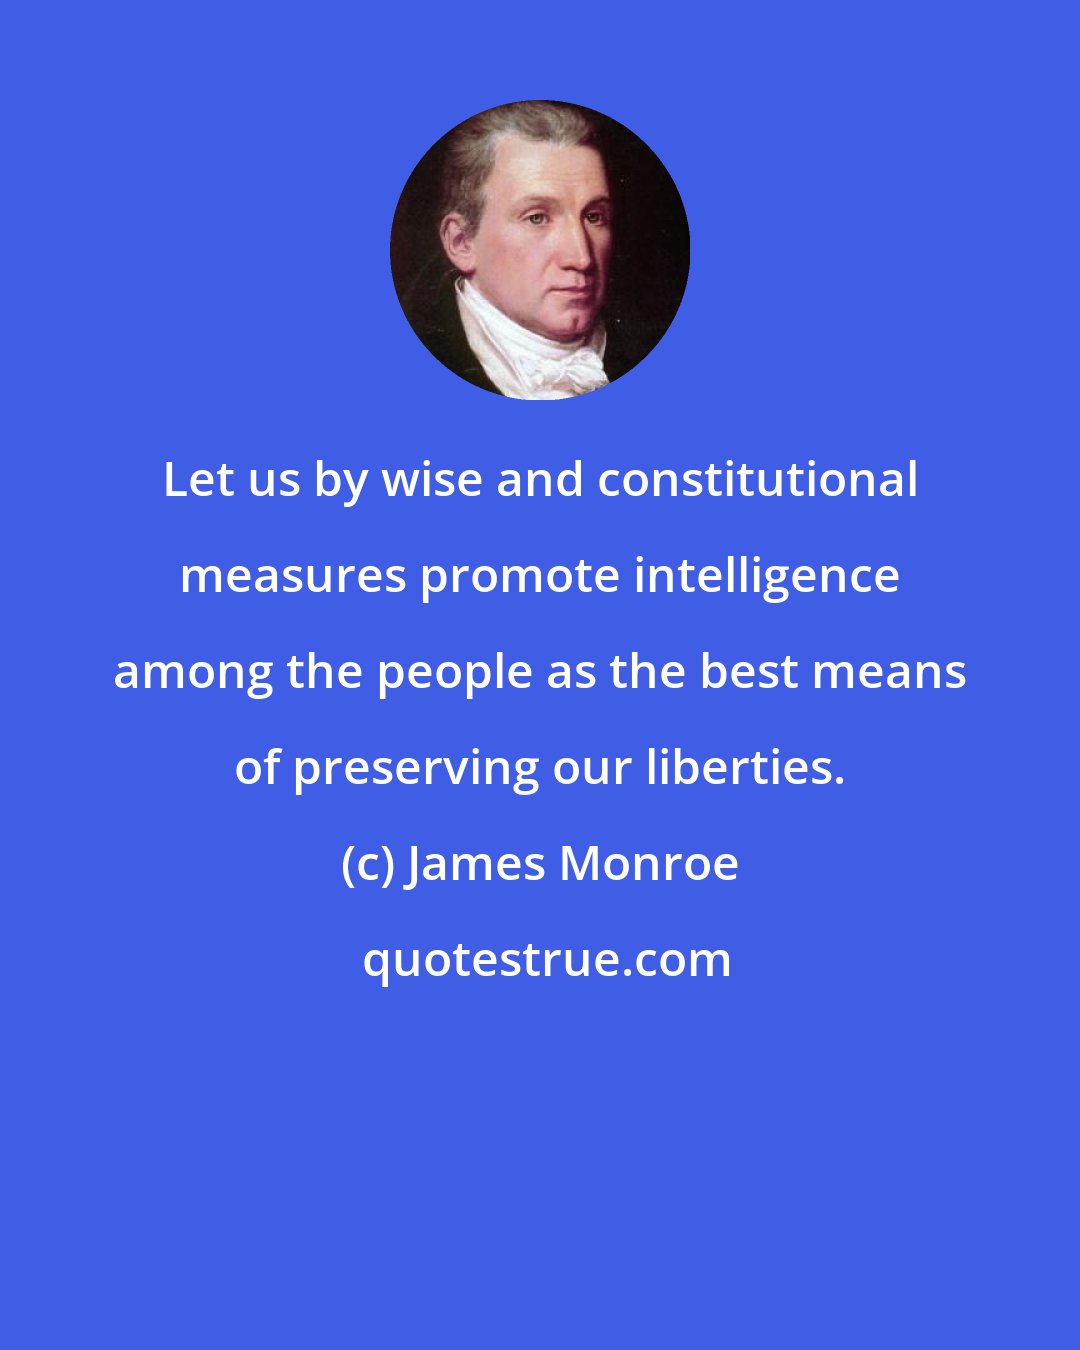 James Monroe: Let us by wise and constitutional measures promote intelligence among the people as the best means of preserving our liberties.